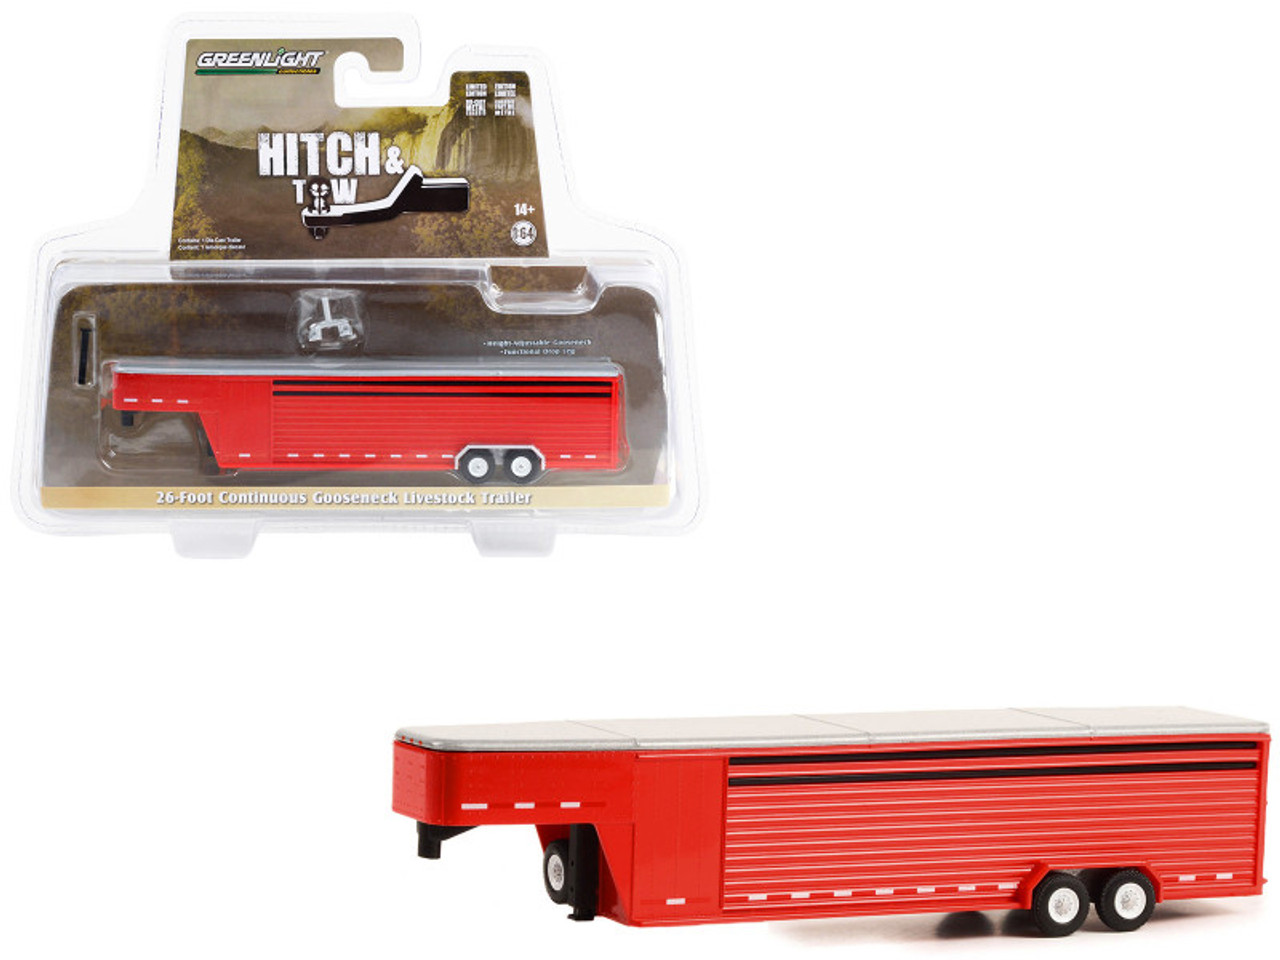 26-Foot Continuous Gooseneck Livestock Trailer Red "Hitch & Tow" Series 1/64 Diecast Model Car by Greenlight